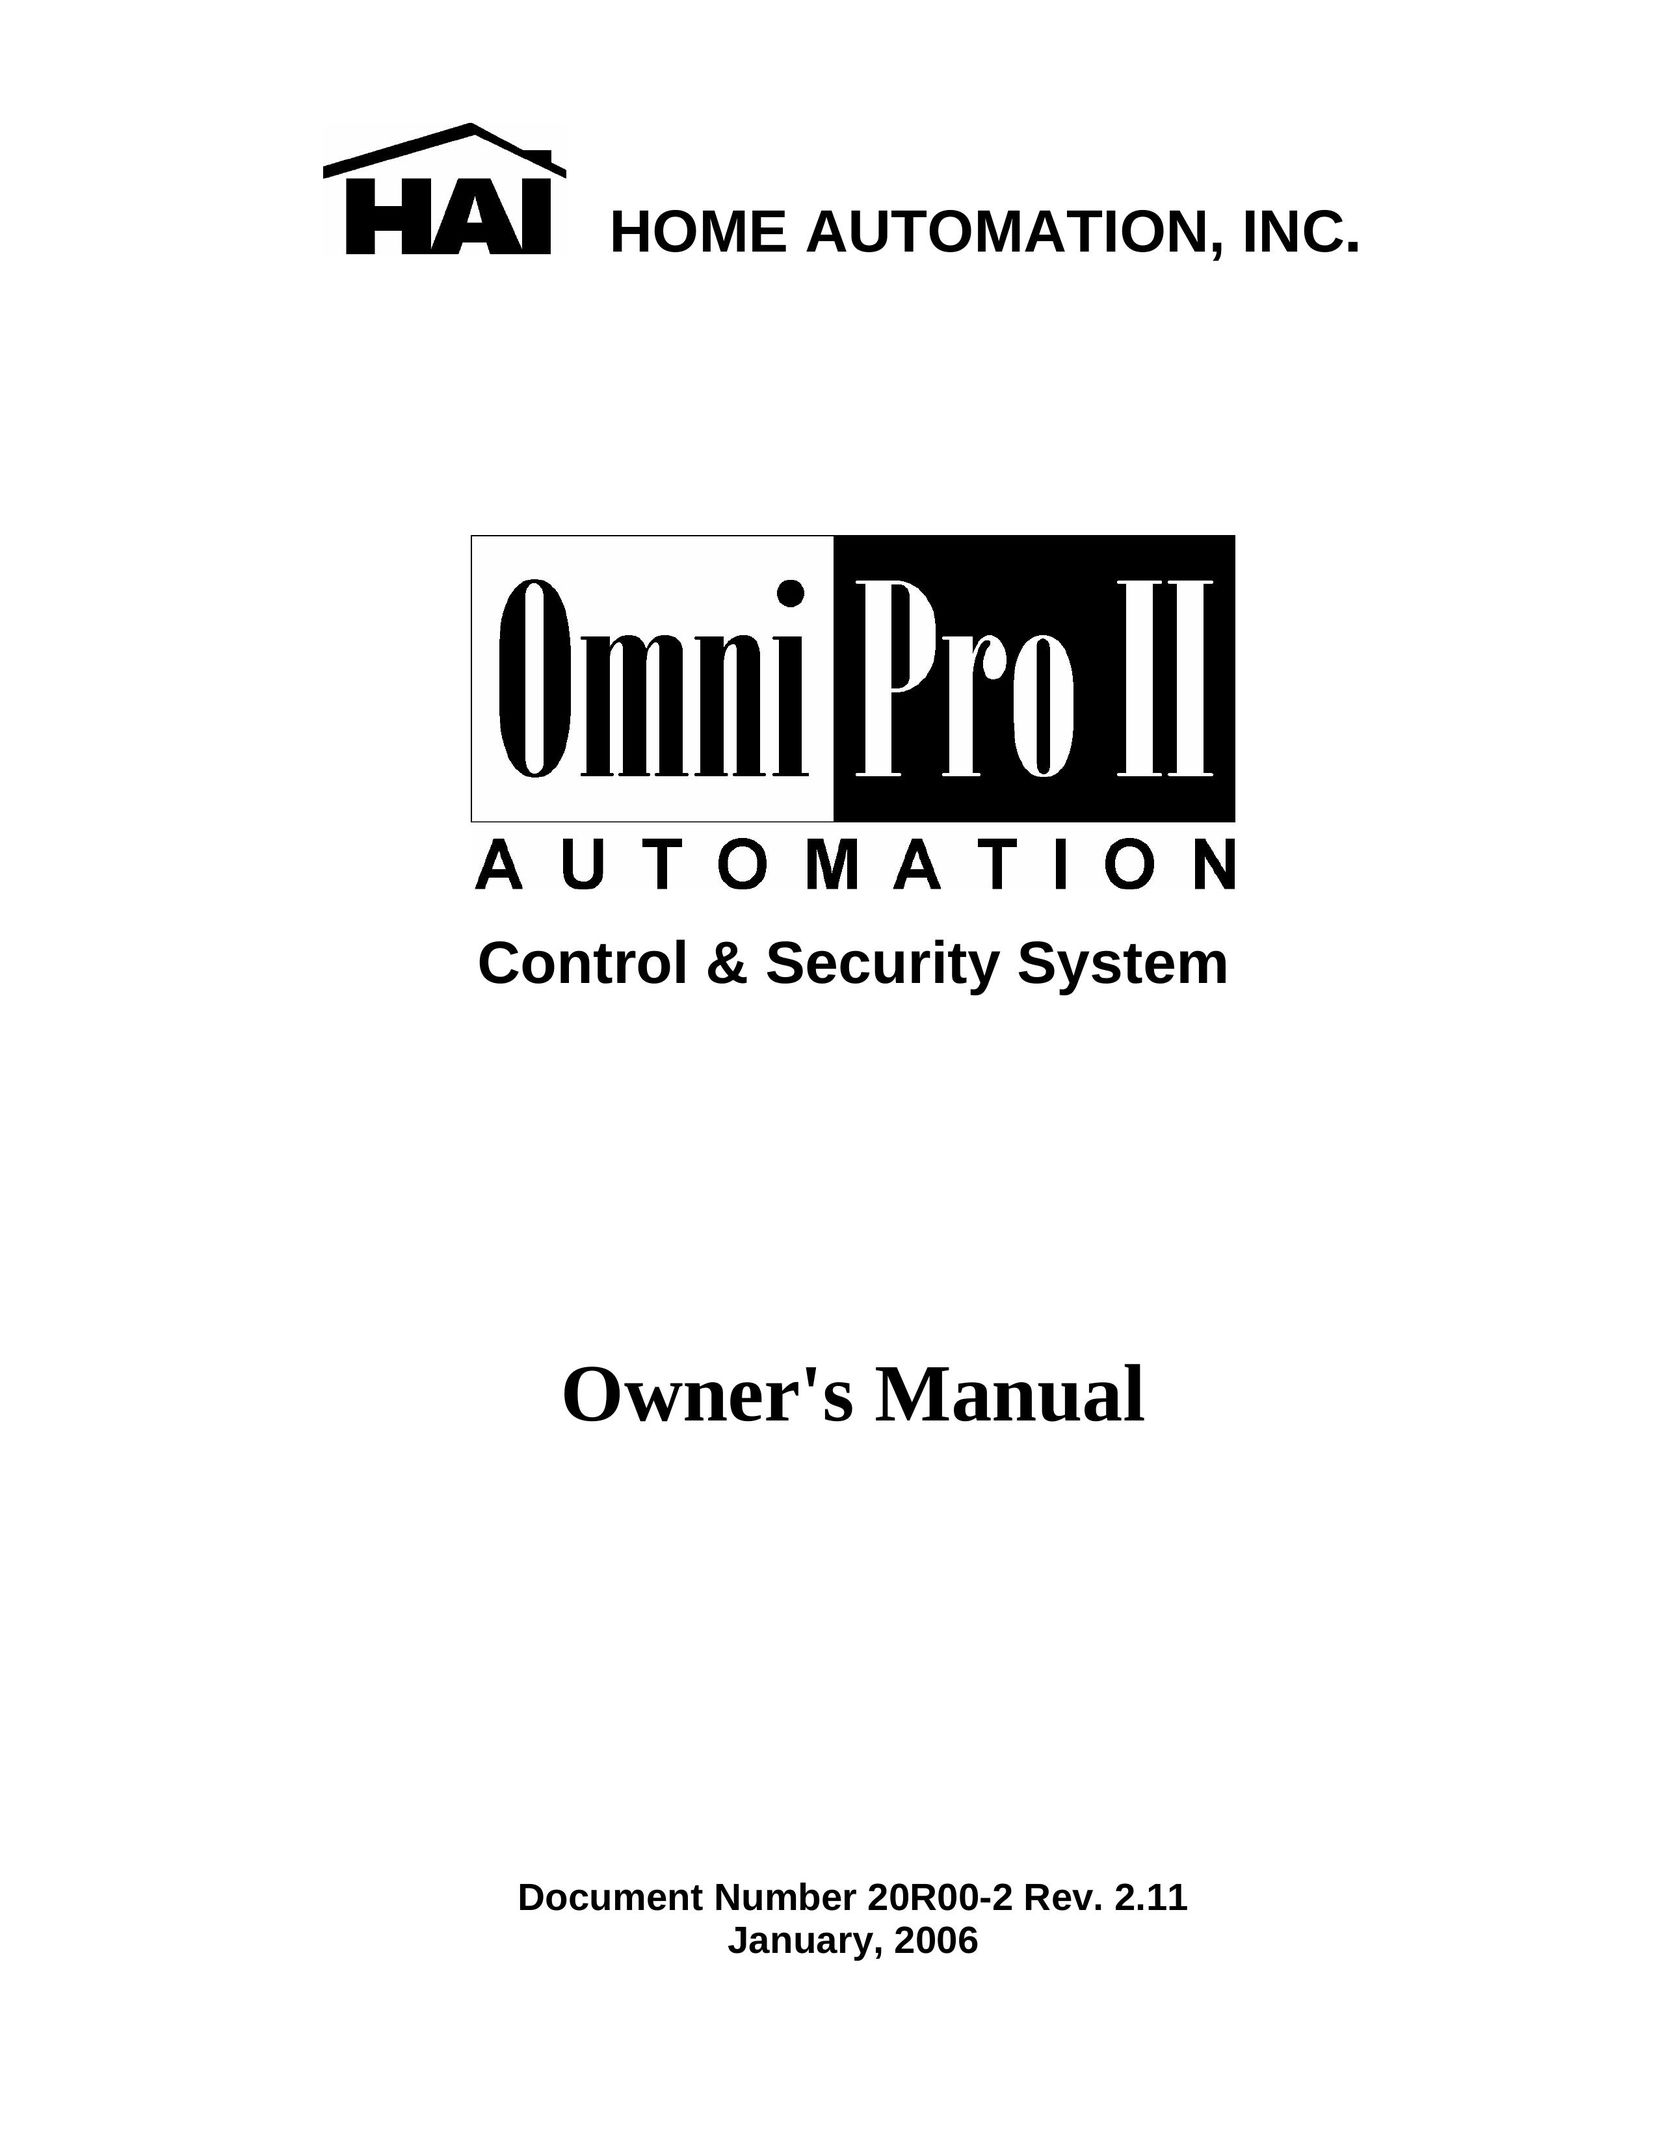 Home Automation OmniPro II Home Security System User Manual